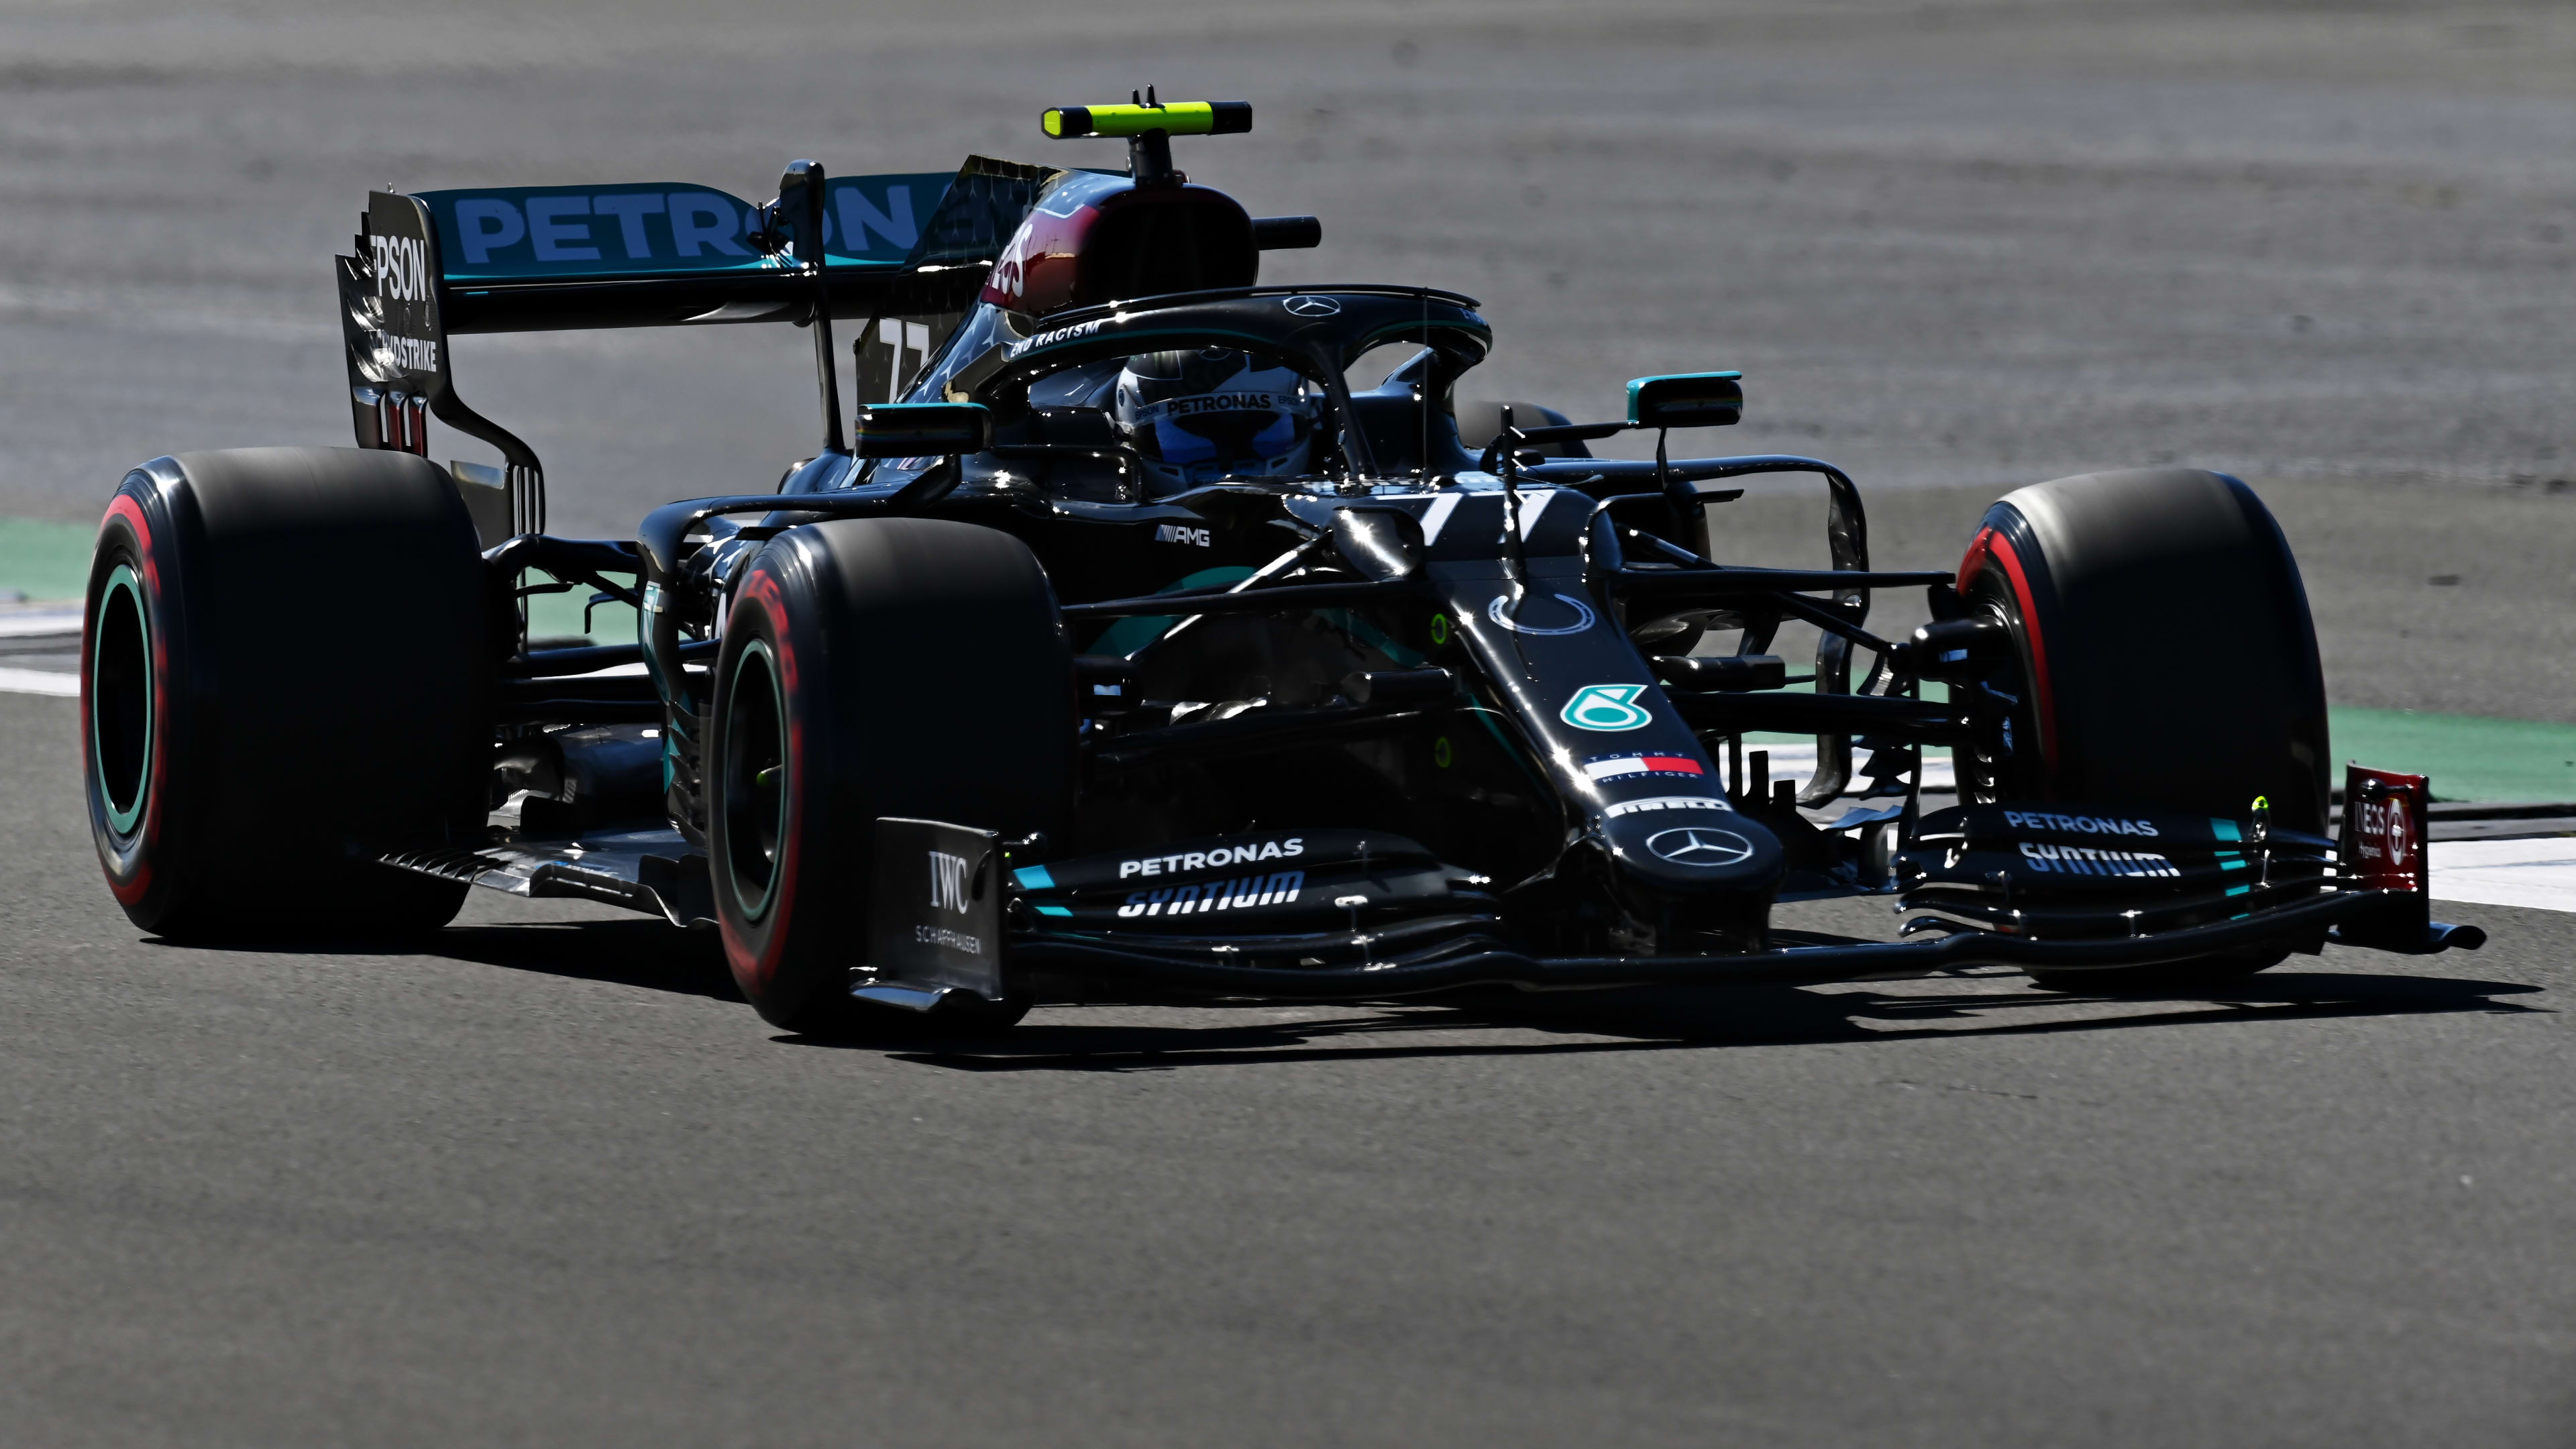 70th Anniversary Grand Prix 2020 FP1 reports and highlights Bottas heads Hamilton in opening 70th Anniversary GP session as Hulkenberg takes P4 Formula 1®